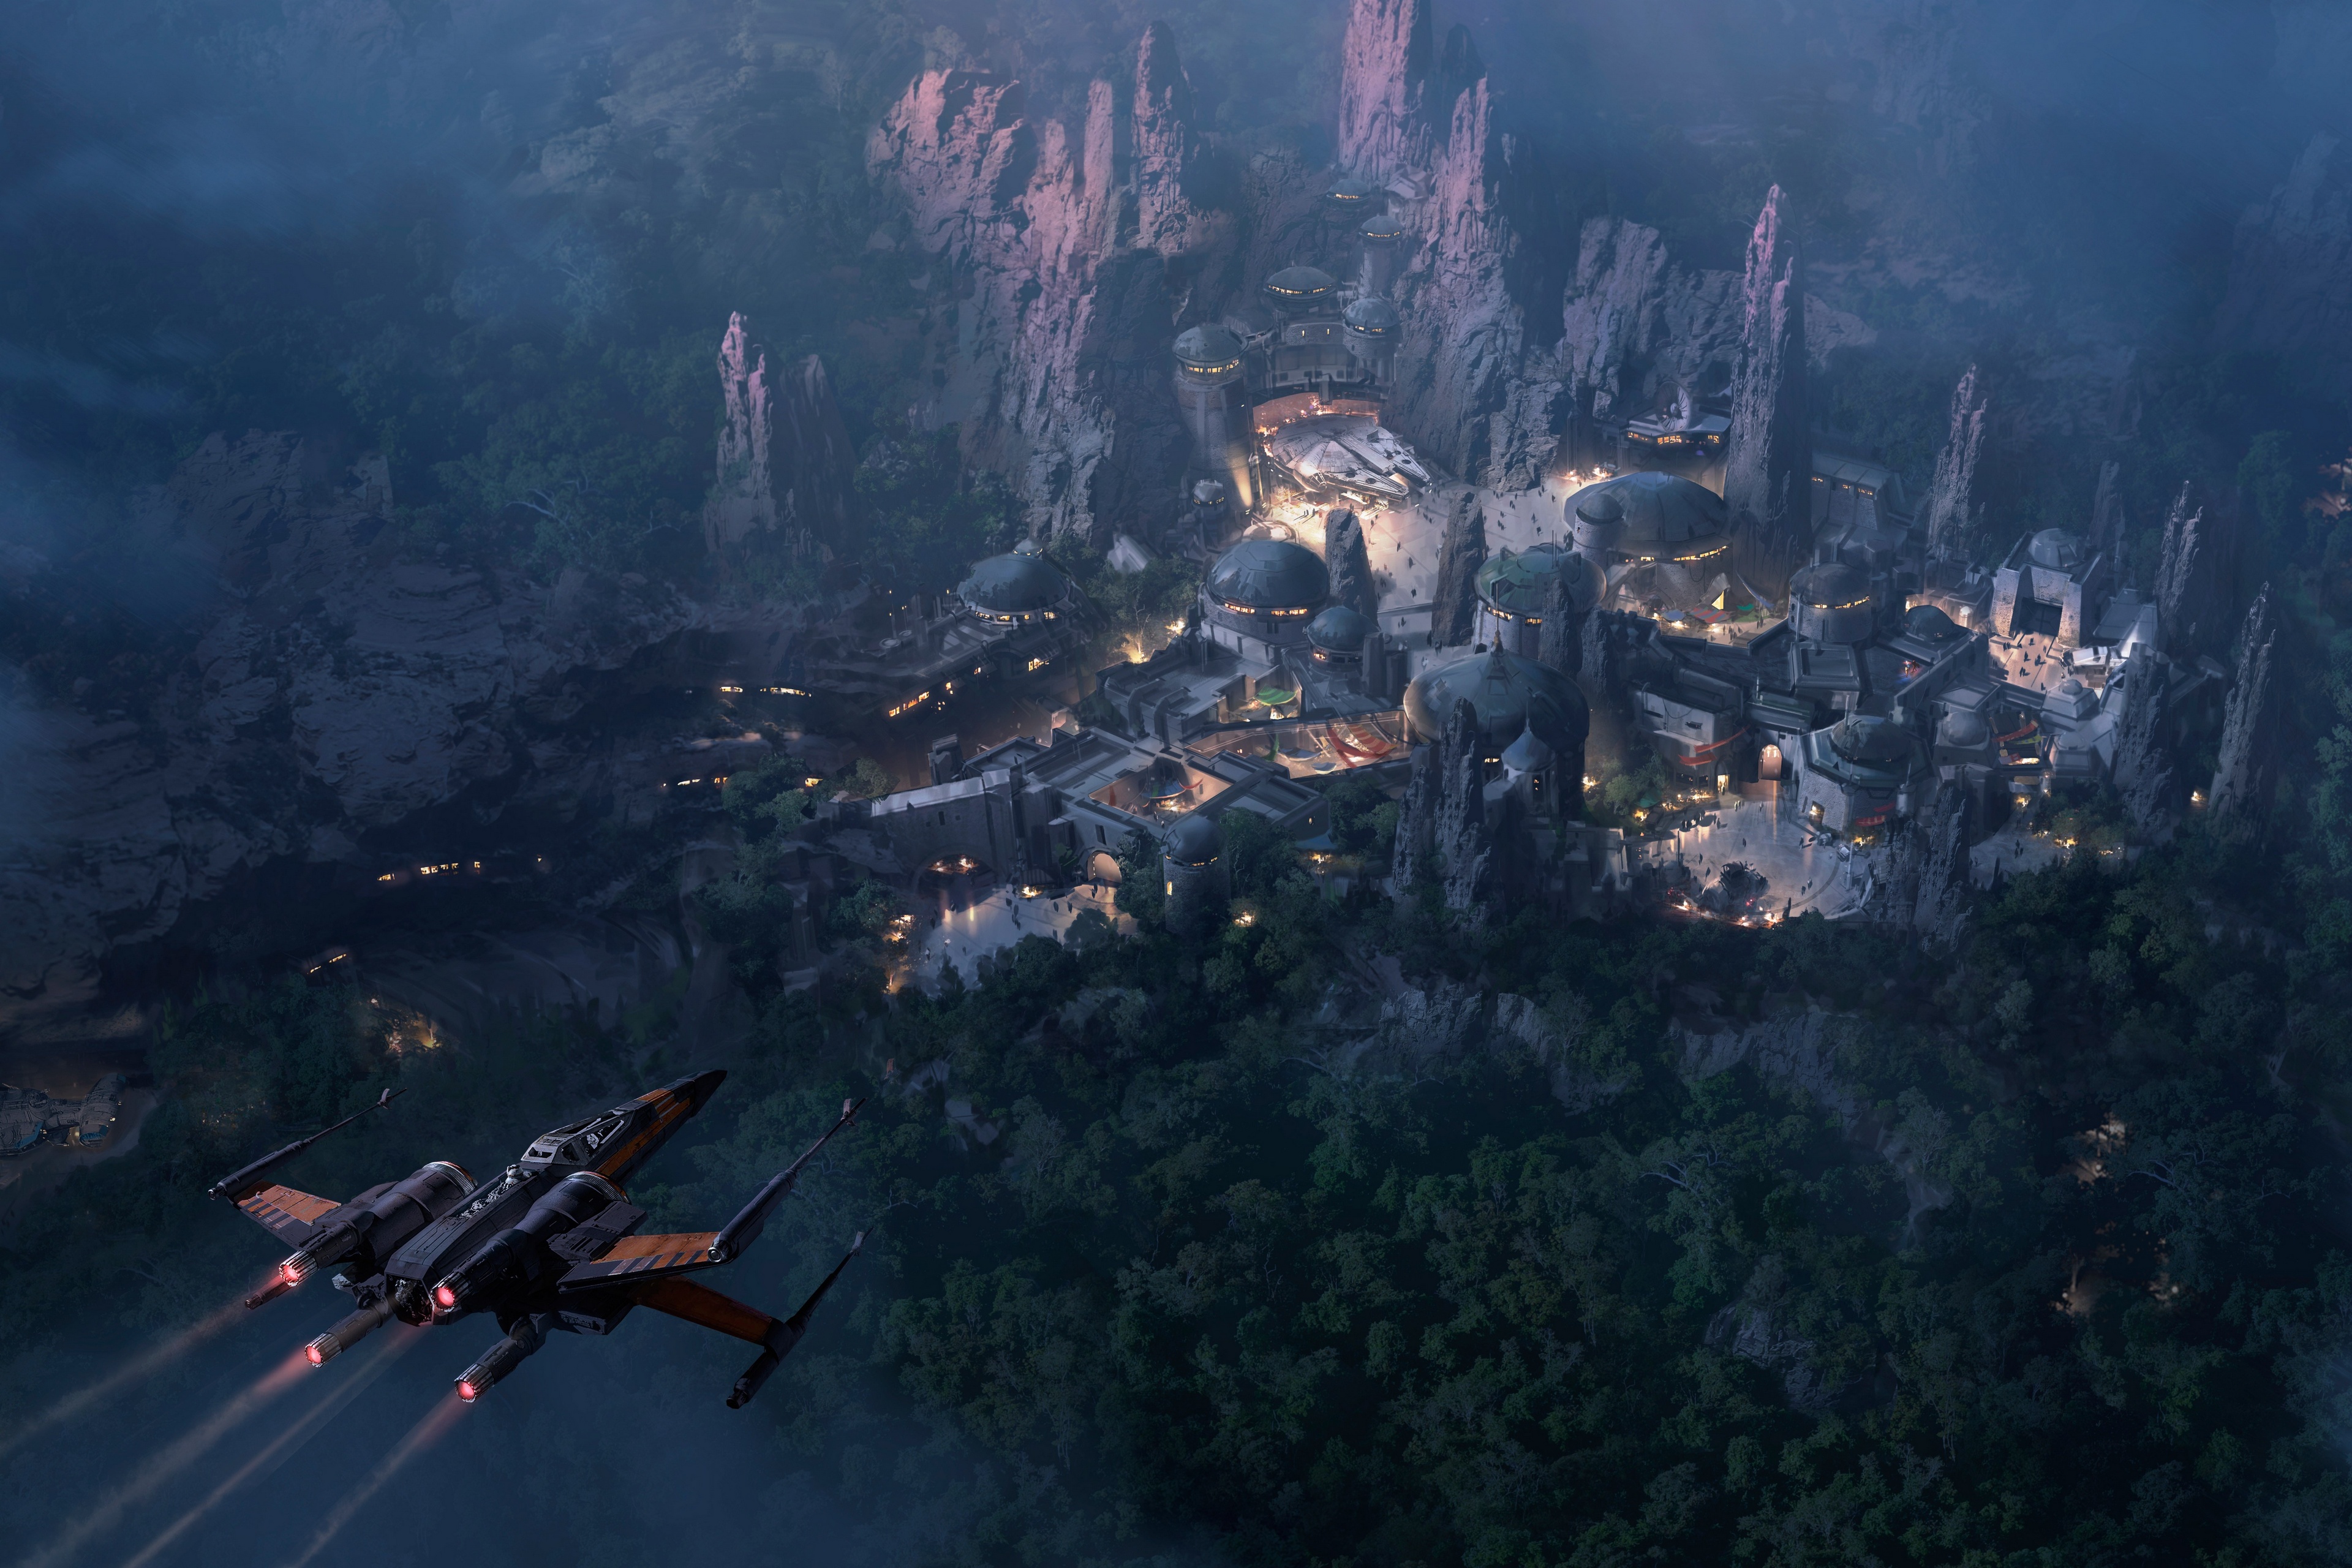 Star Wars Science Fiction Spaceship Artwork Mountains Forest Fort City Fantasy Art X Wing 3840x2560